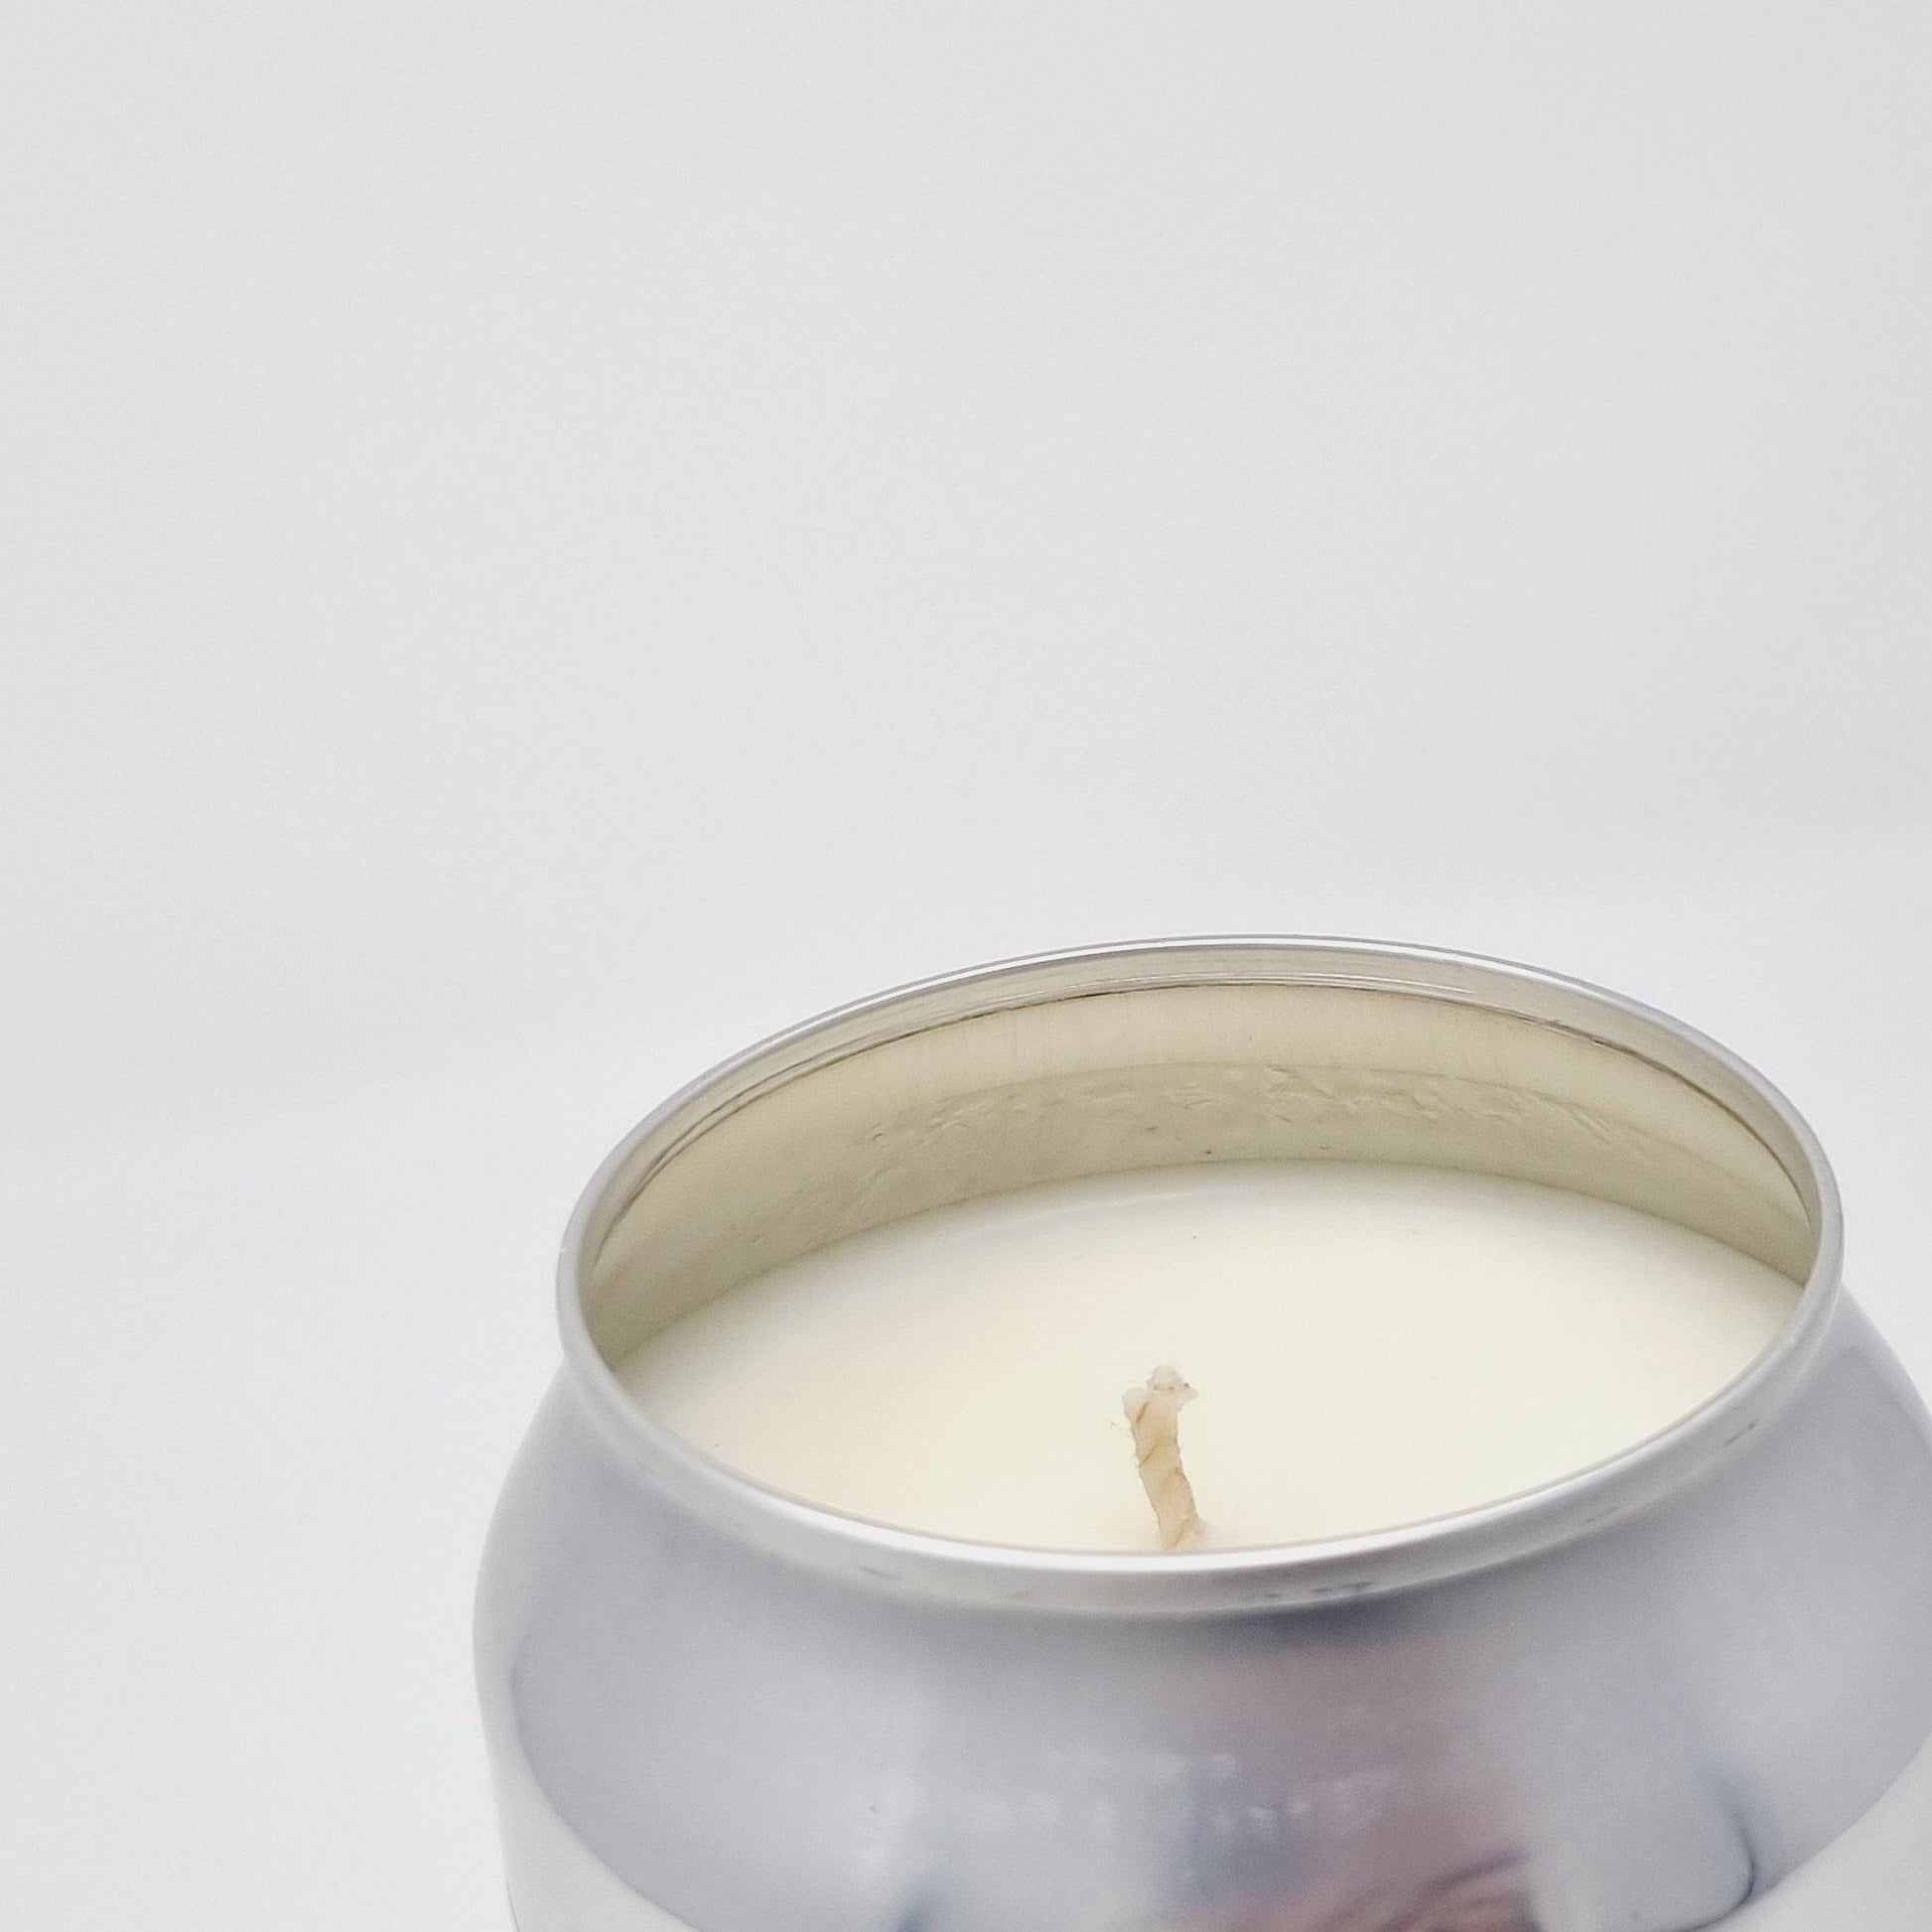 Eco Friendly-I Don't Know Circuitry? Deya Craft Beer Can Candle--Adhock Homeware